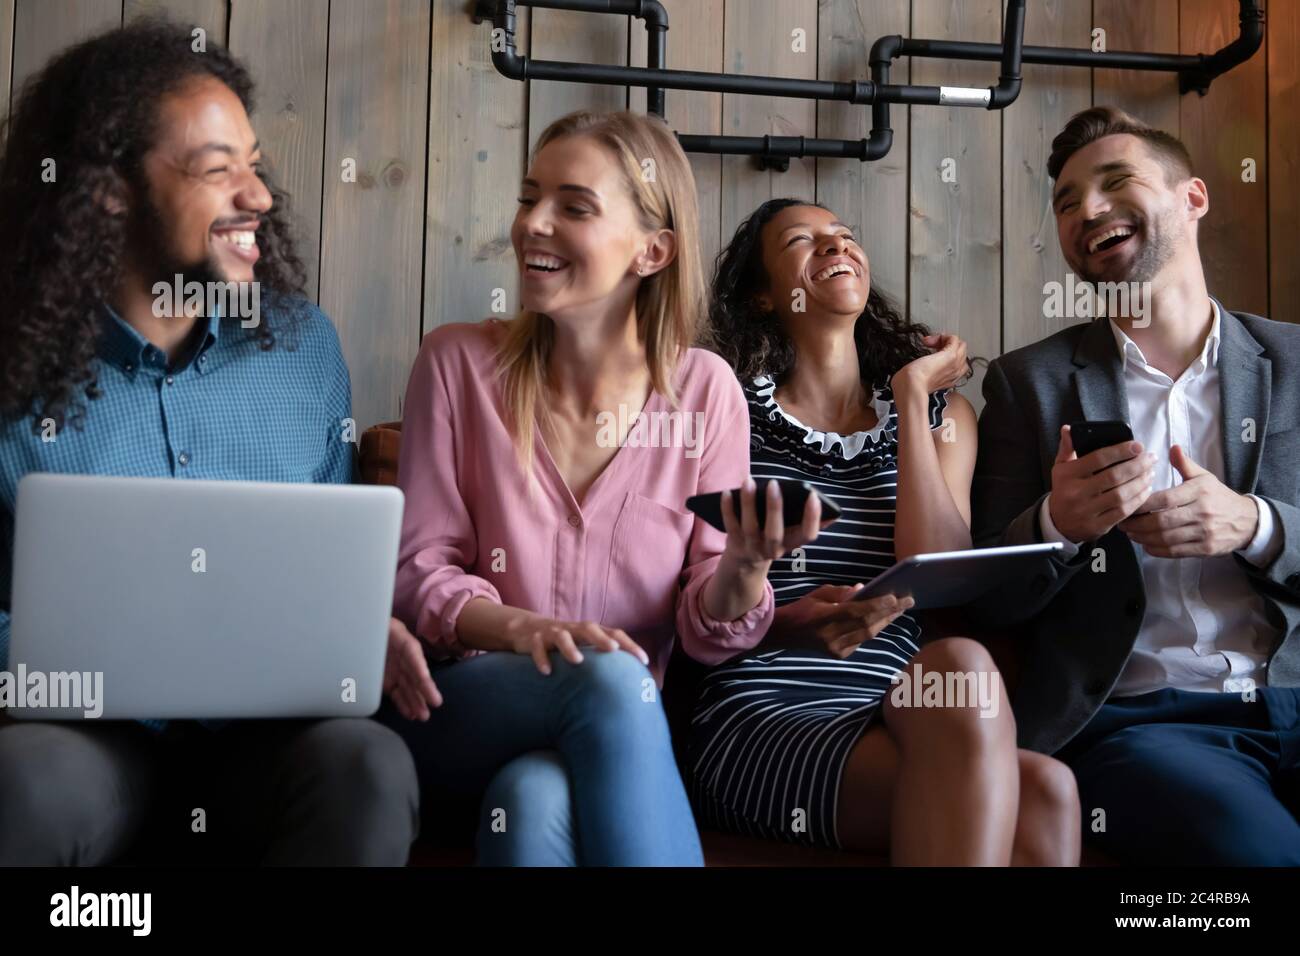 Multiethnic friends holding gadgets laughing over funny videos Stock Photo